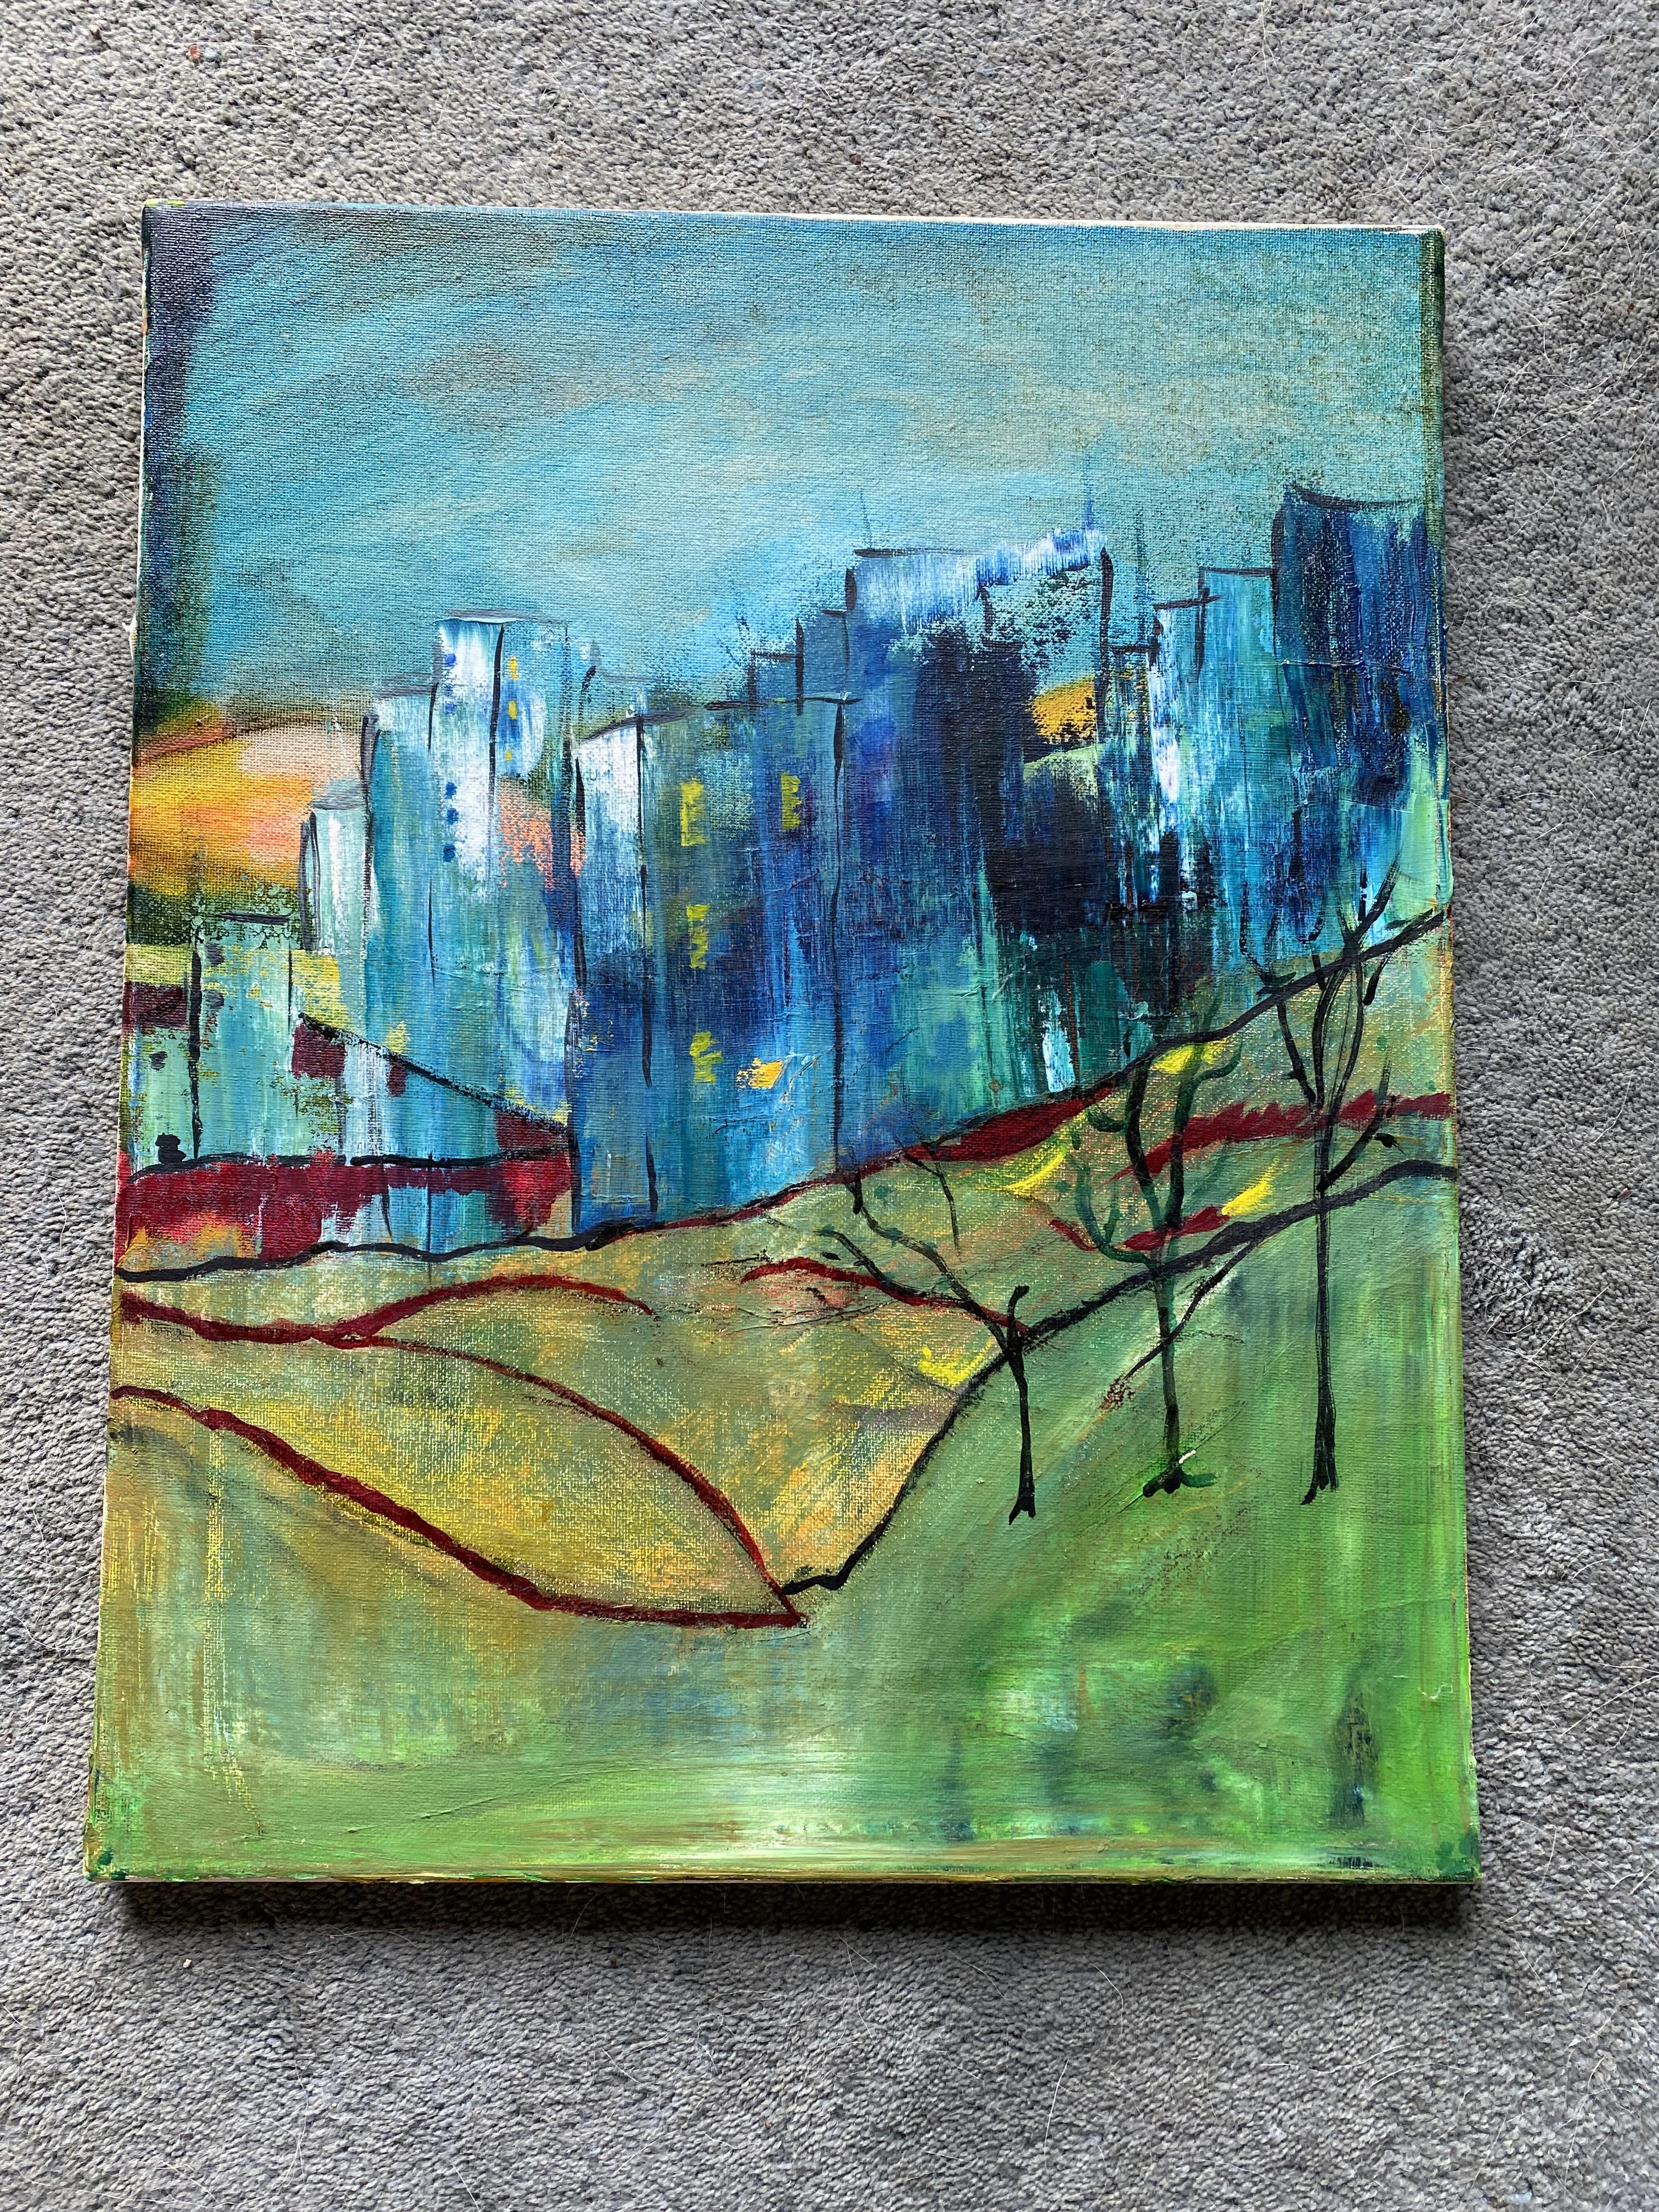 Image of painting by featured artist, Jana Durham.